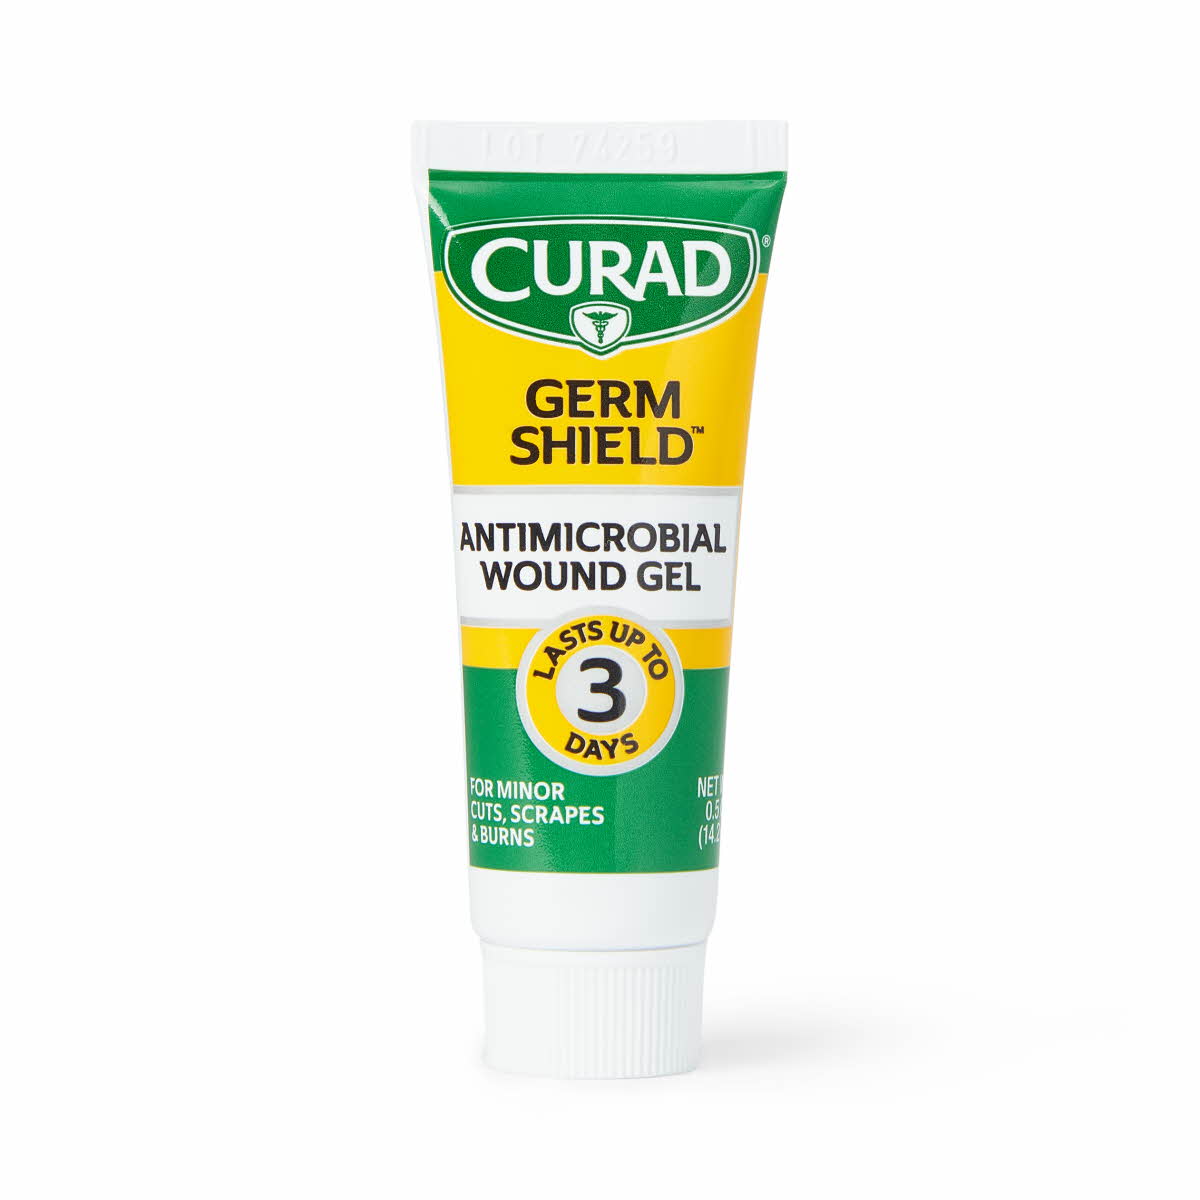 Curad Germ Shield Antimicrobial Silver Wound Gel, For Minor Cuts, Scrapes and Burns, 0.5 Oz Tube, 1 Count - image 3 of 5